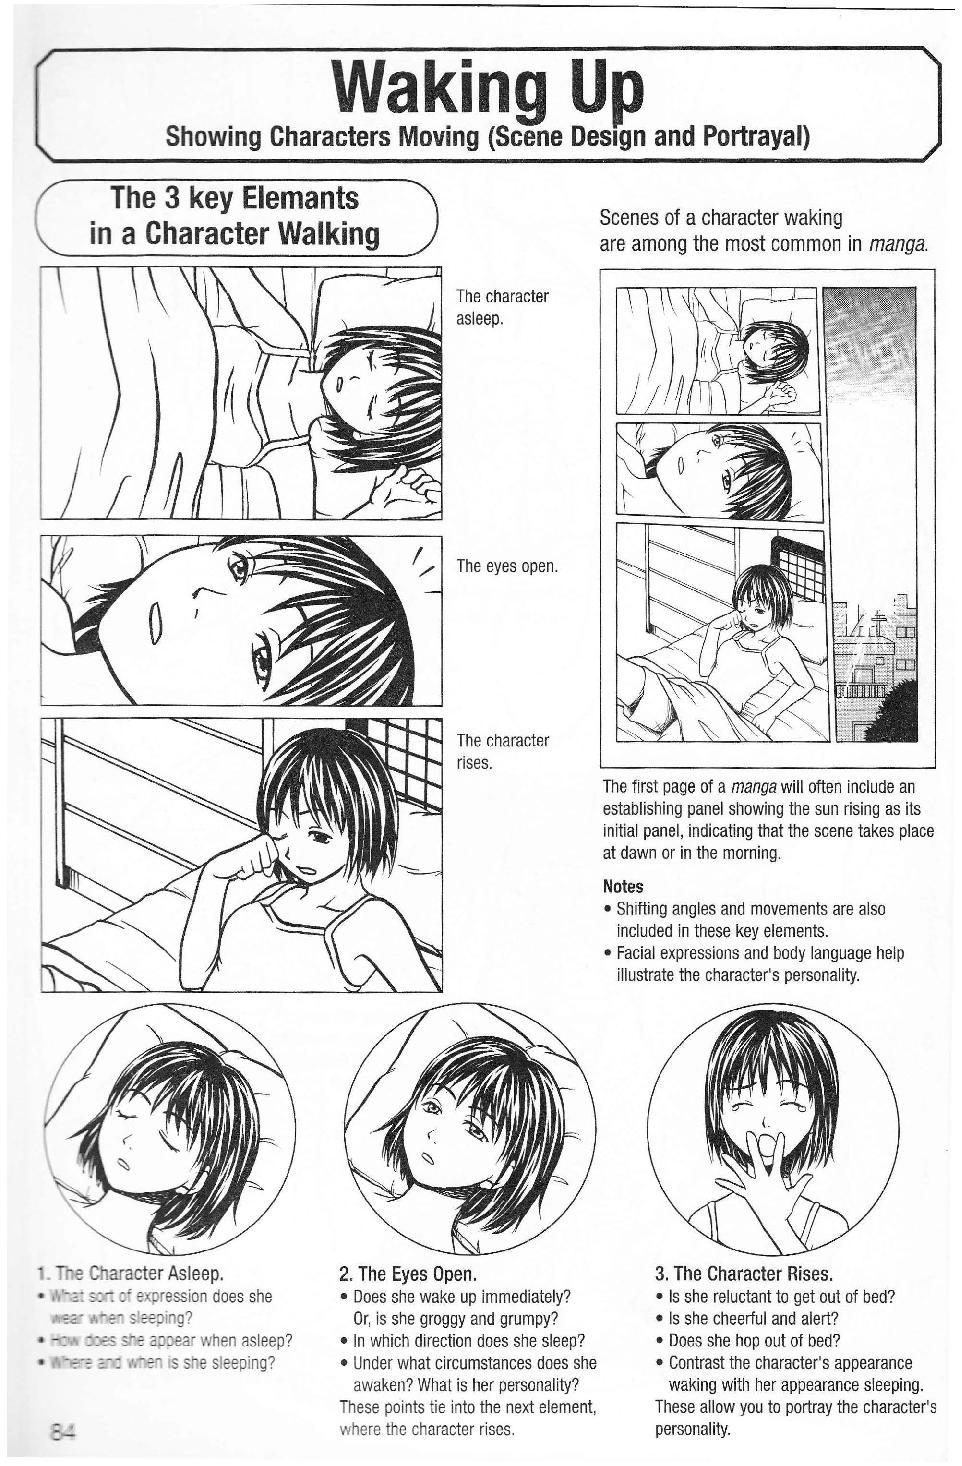 More How to Draw Manga Vol. 2 - Penning Characters 85